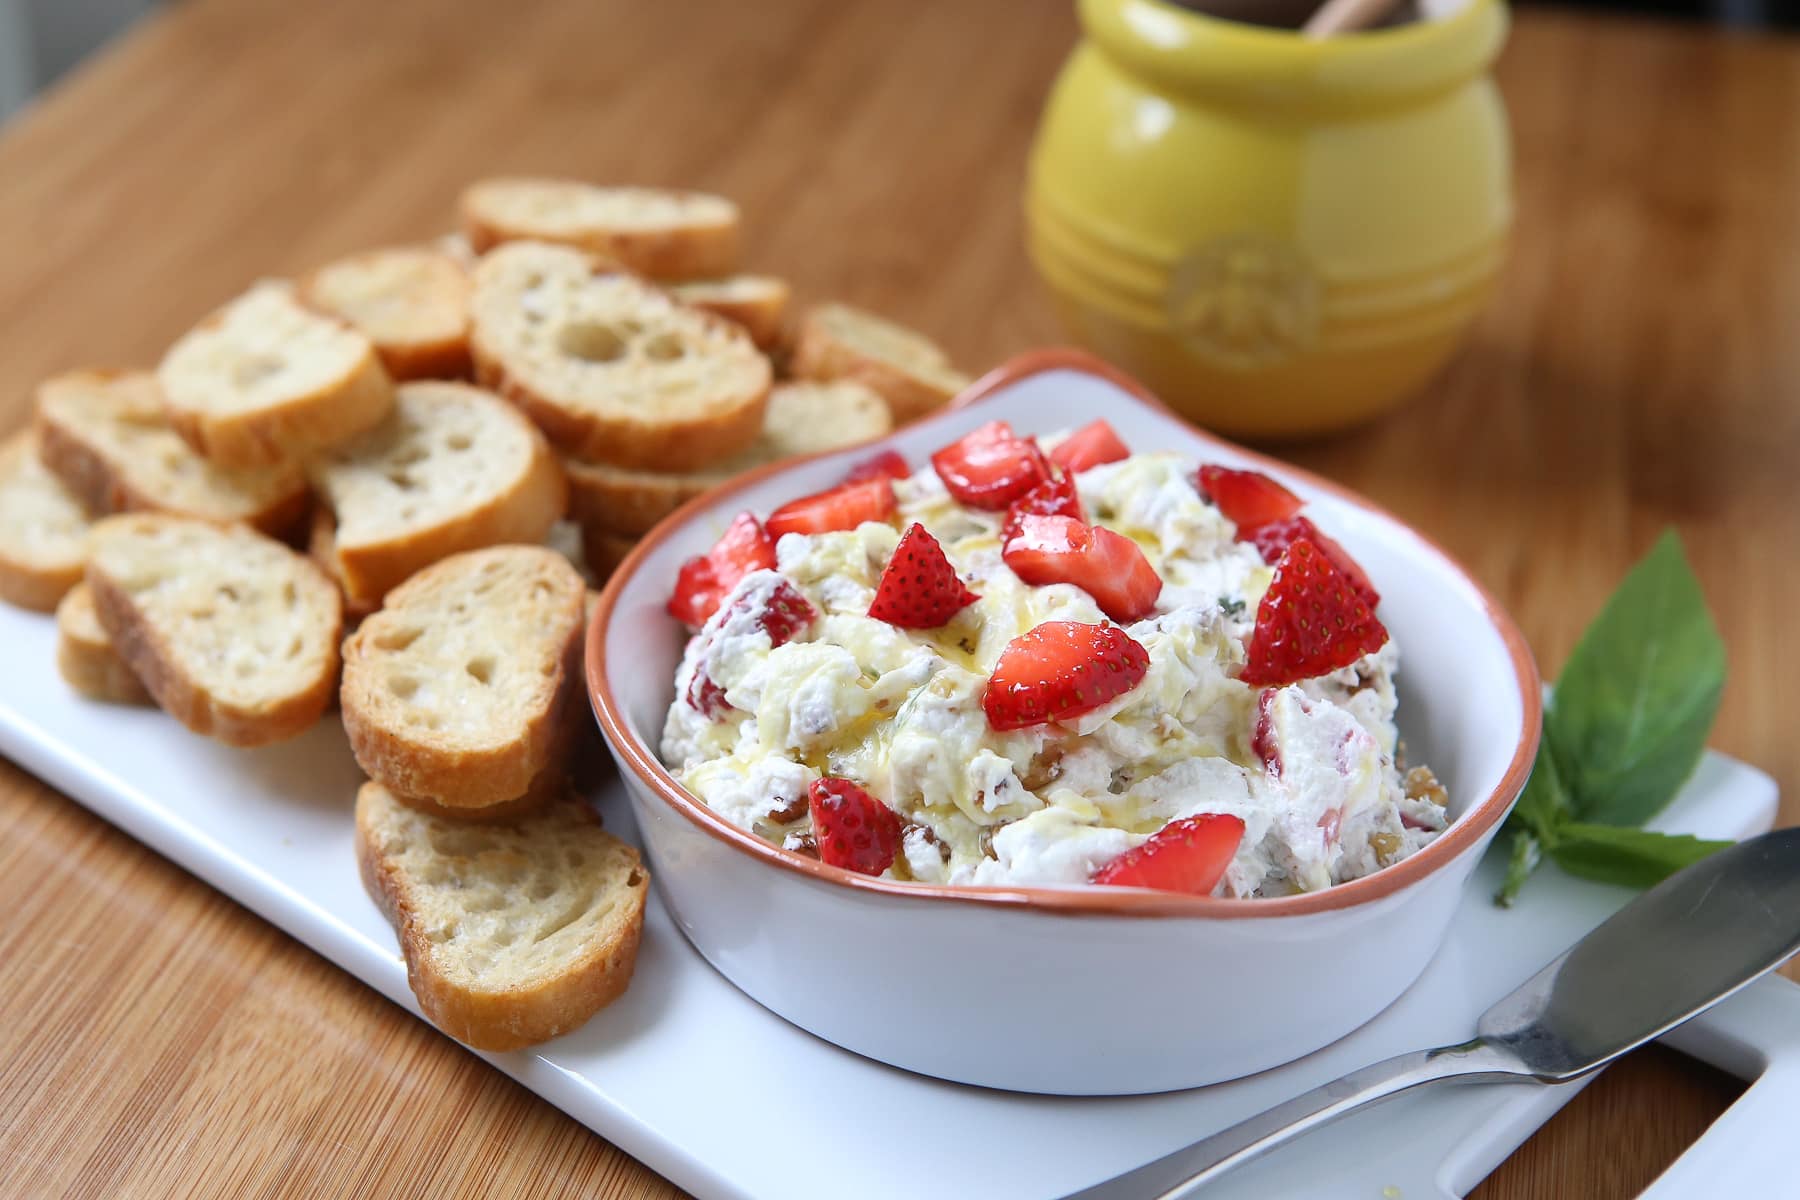 Strawberry Basil Goat Cheese Spread with Walnuts